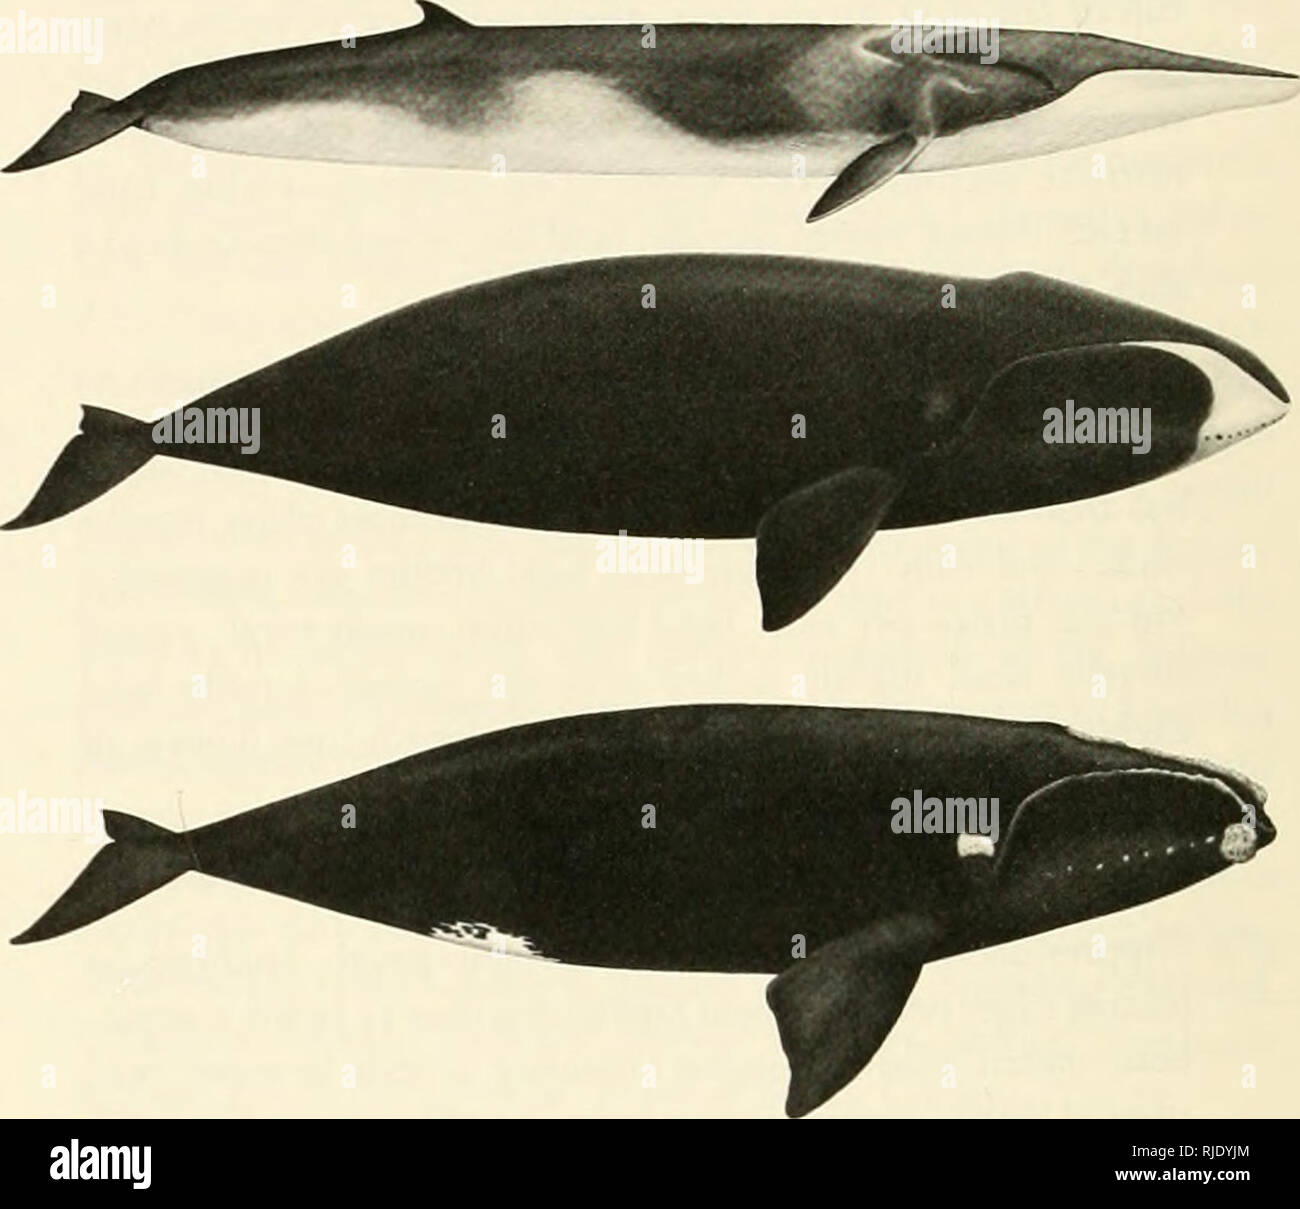 Cetaceans of the Channel Islands National Marine Sanctuary. Cetacea;  Mammals. 7. a. Head broad and almost U-shaped seen dorsally; dorsal fin  less than J J cm and far back on tail